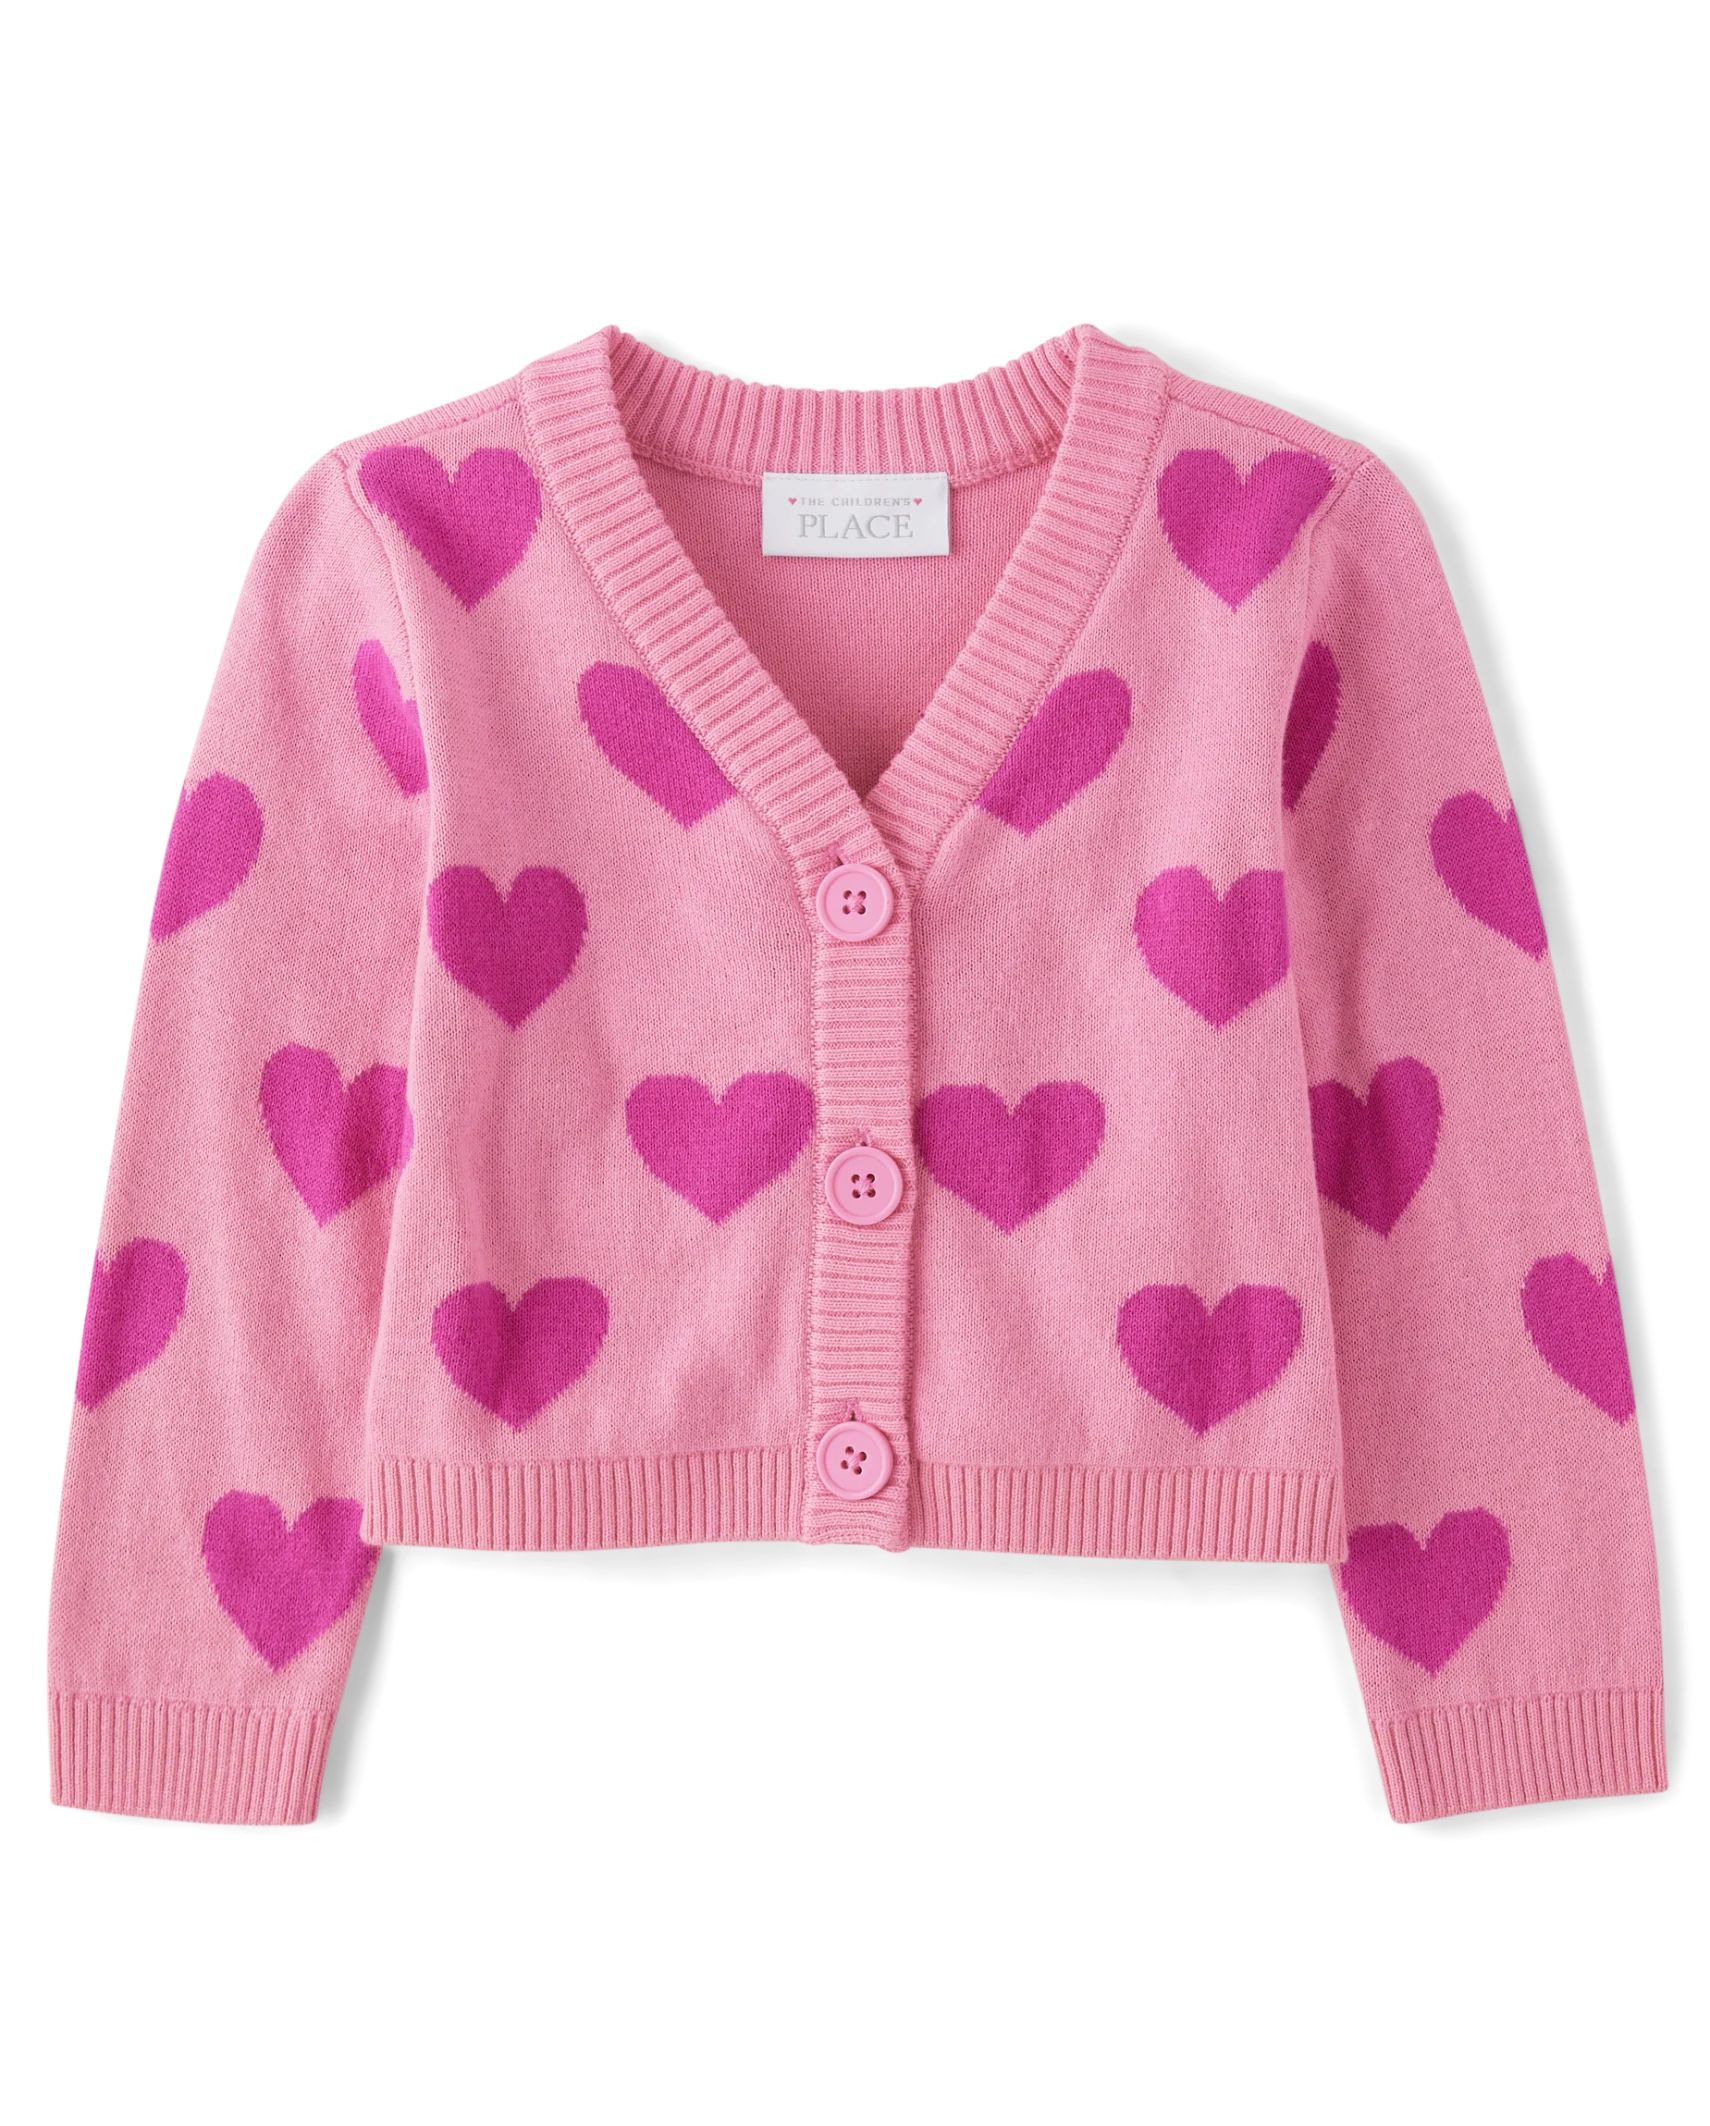 Toddler Girls Heart Cardigan - bright pink | The Children's Place